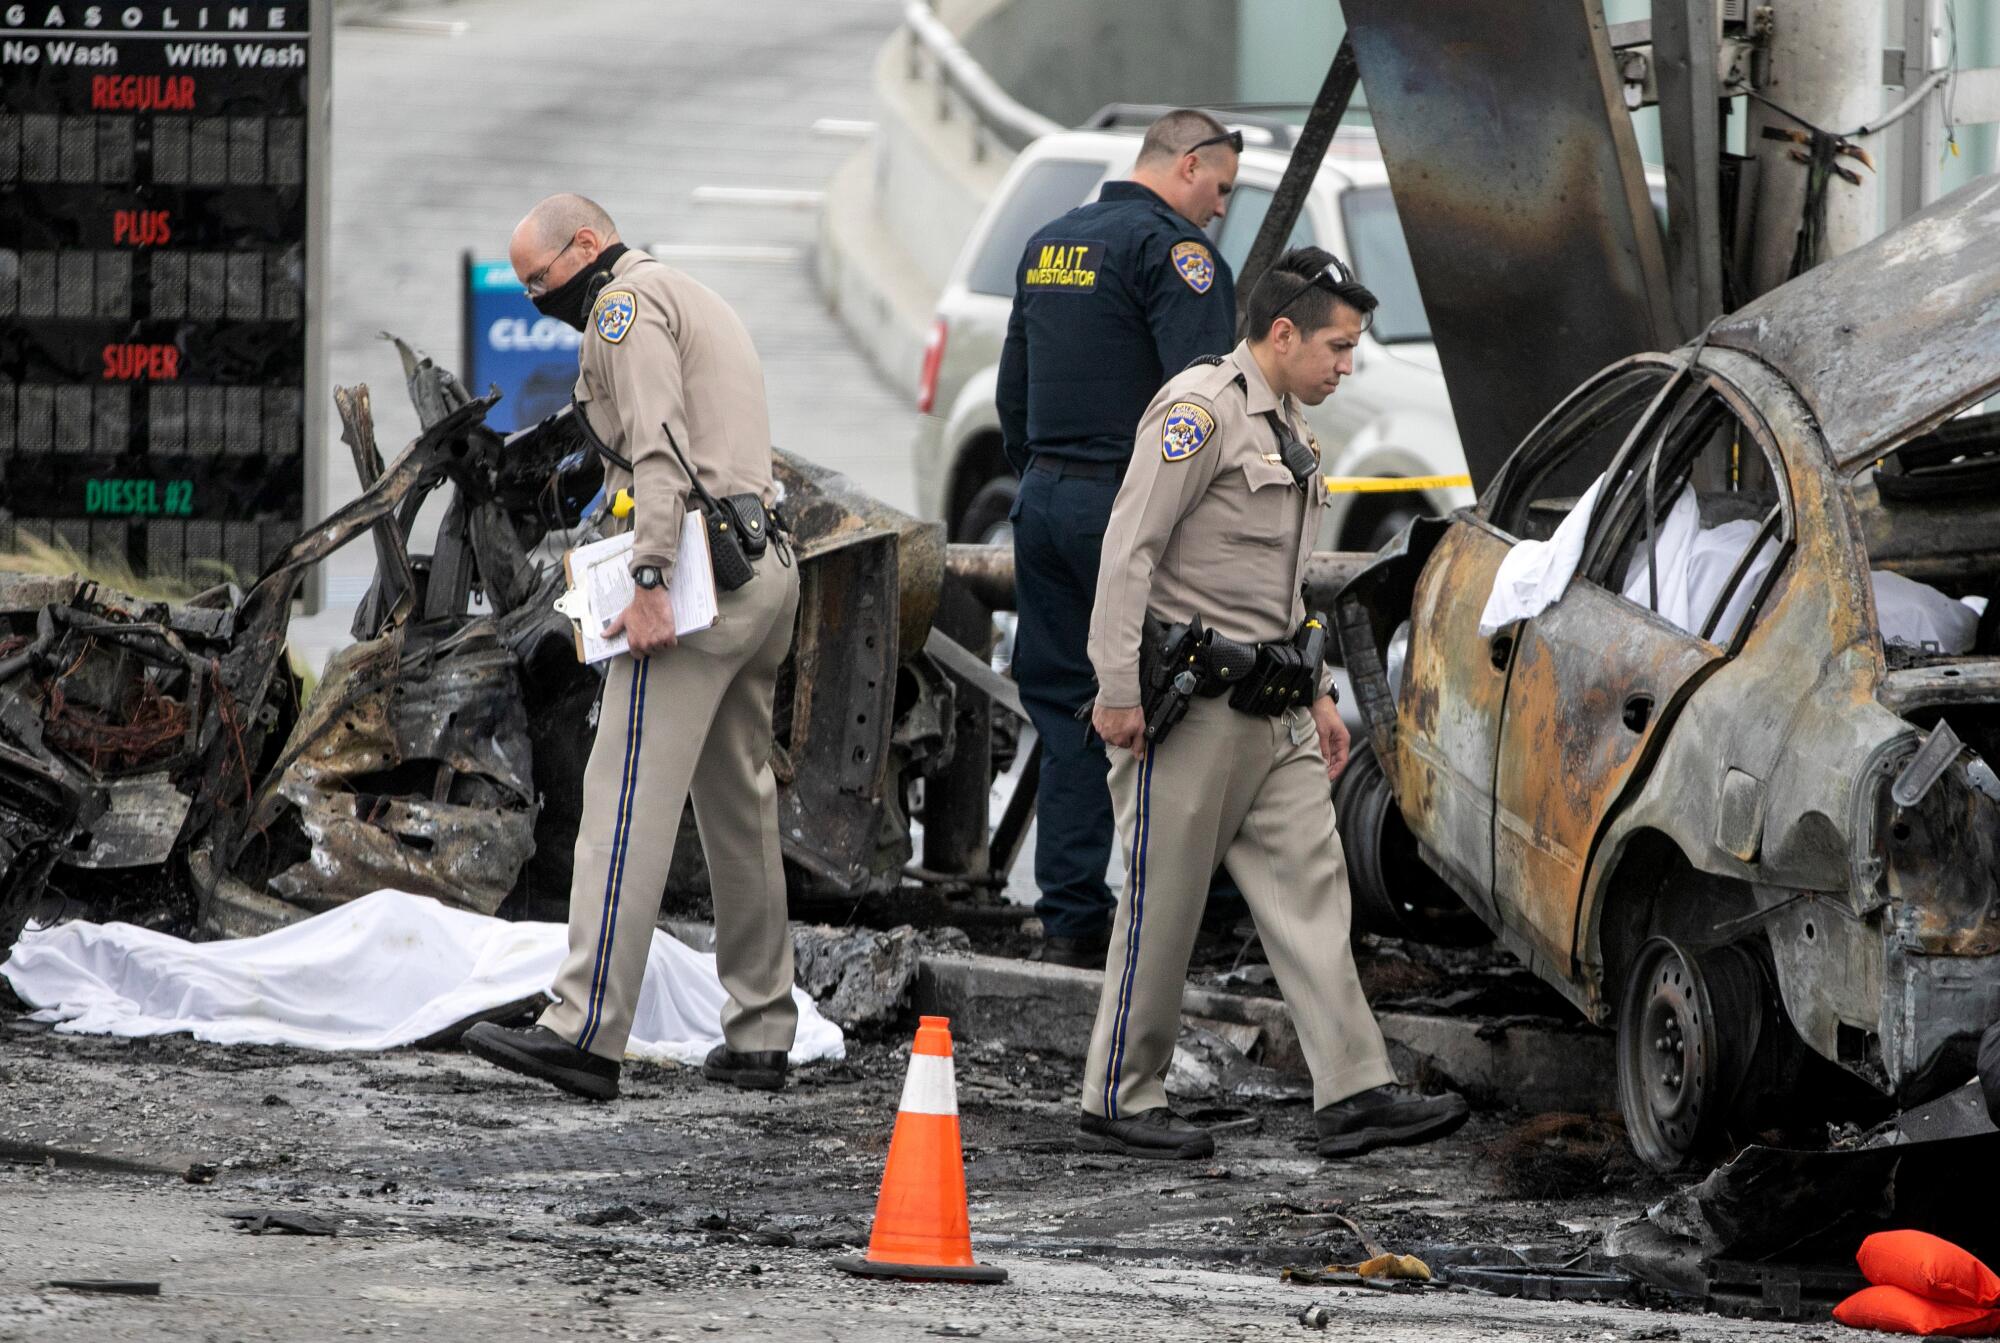 California Highway Patrol officers and first responders investigate a crash.